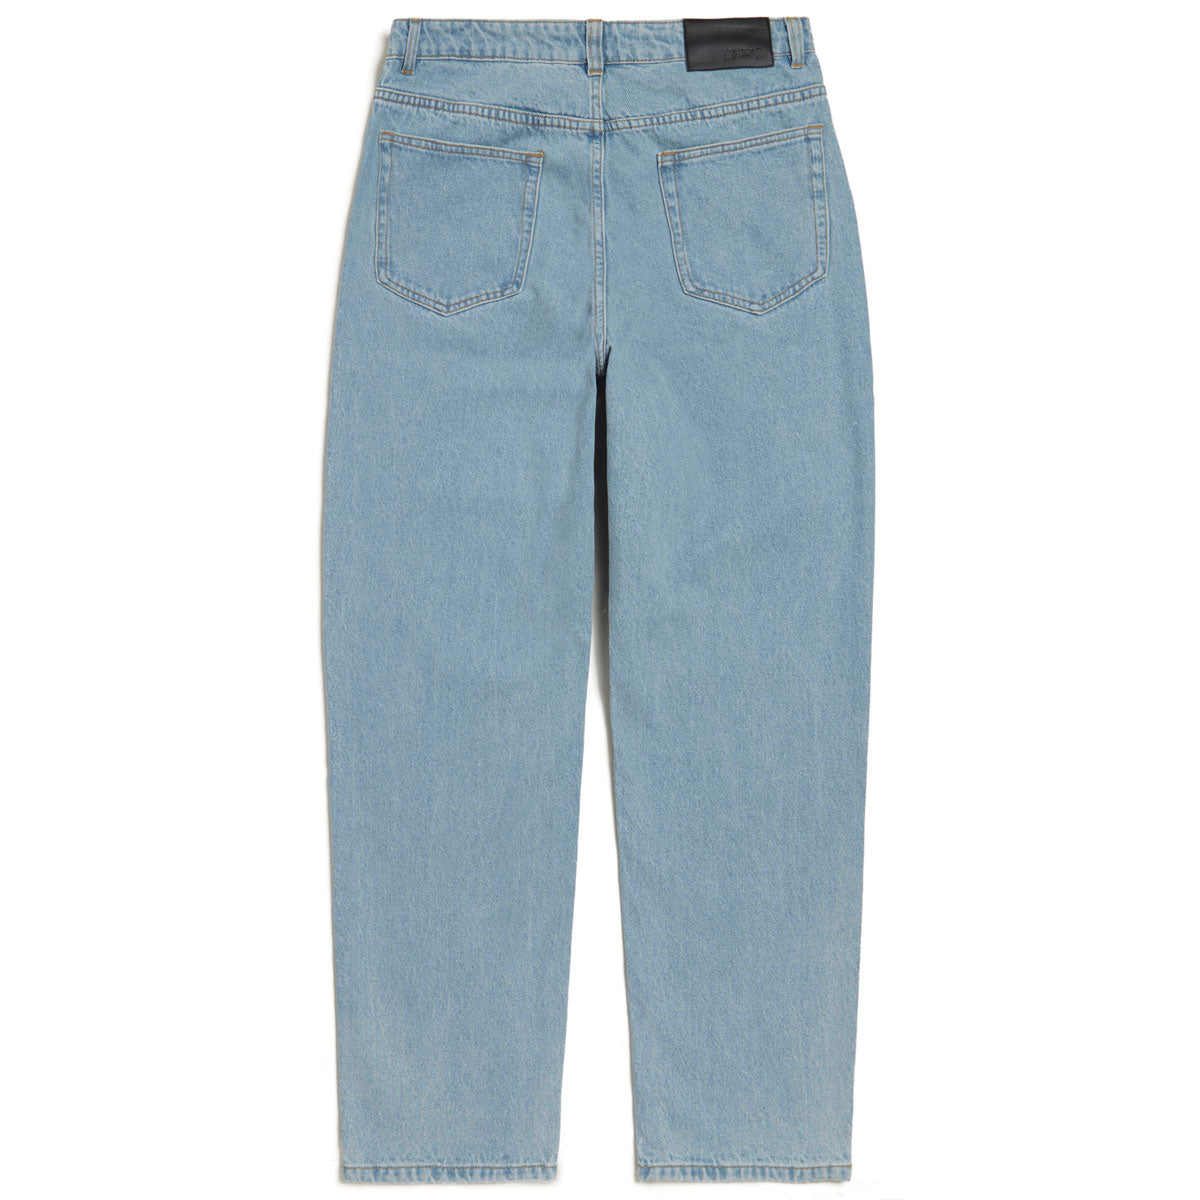 CCS Original Relaxed Taper Jeans - Light Wash image 5